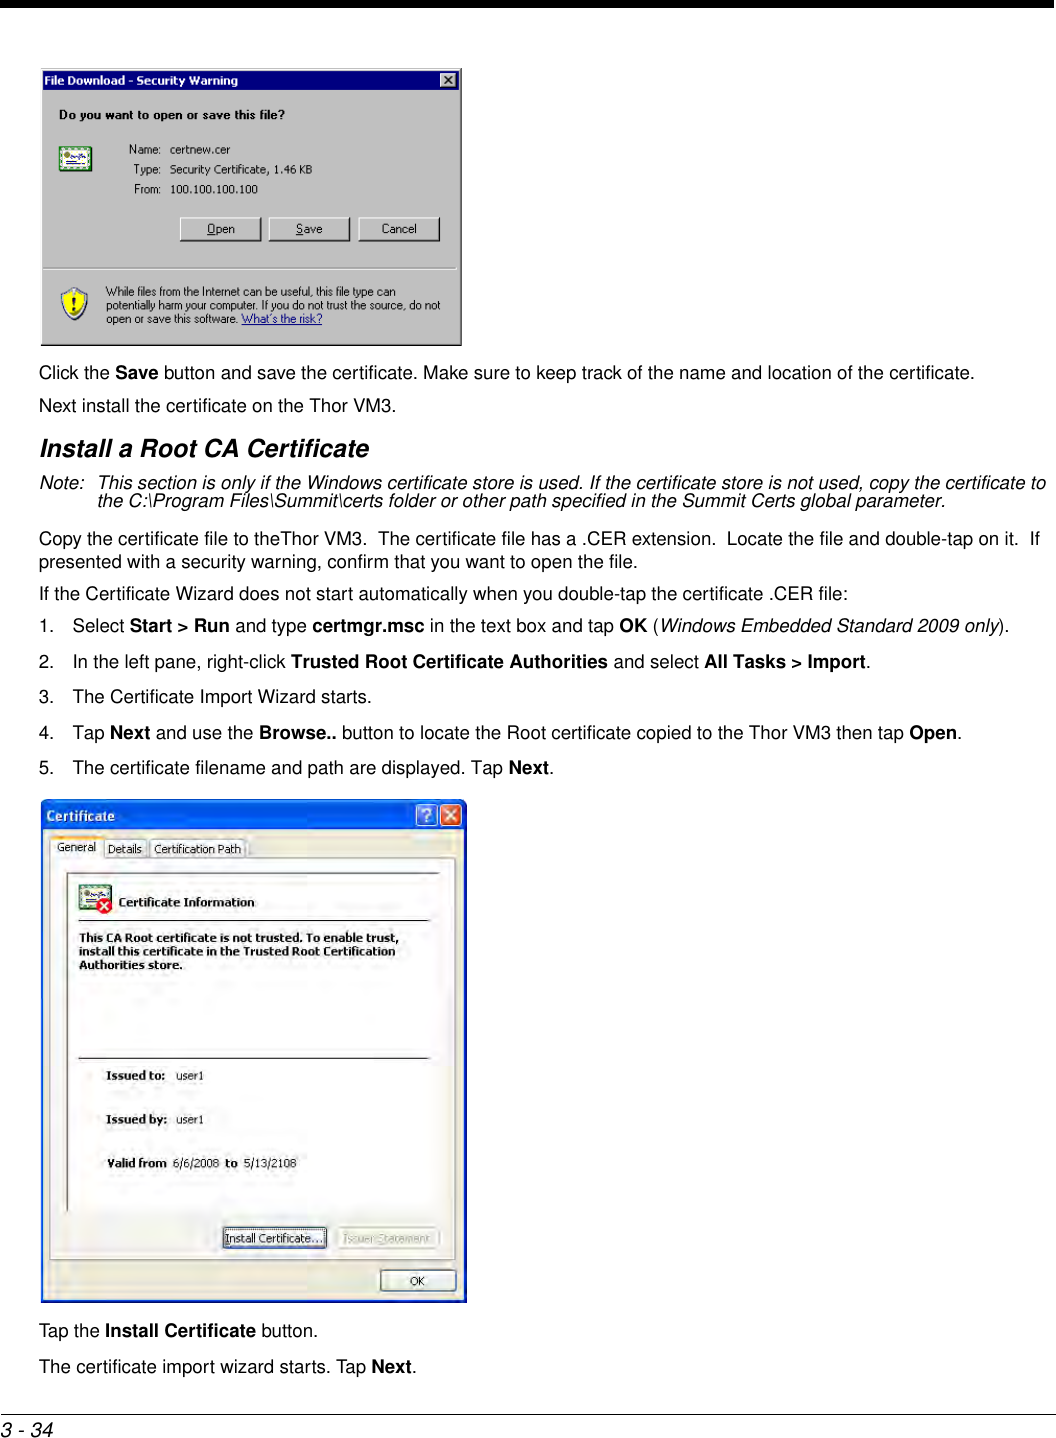 3 - 34Click the Save button and save the certificate. Make sure to keep track of the name and location of the certificate.Next install the certificate on the Thor VM3.Install a Root CA CertificateNote: This section is only if the Windows certificate store is used. If the certificate store is not used, copy the certificate to the C:\Program Files\Summit\certs folder or other path specified in the Summit Certs global parameter.Copy the certificate file to theThor VM3.  The certificate file has a .CER extension.  Locate the file and double-tap on it.  If presented with a security warning, confirm that you want to open the file.If the Certificate Wizard does not start automatically when you double-tap the certificate .CER file:1. Select Start &gt; Run and type certmgr.msc in the text box and tap OK (Windows Embedded Standard 2009 only).2. In the left pane, right-click Trusted Root Certificate Authorities and select All Tasks &gt; Import.3. The Certificate Import Wizard starts.4. Tap Next and use the Browse.. button to locate the Root certificate copied to the Thor VM3 then tap Open.5. The certificate filename and path are displayed. Tap Next.Tap the Install Certificate button.The certificate import wizard starts. Tap Next.